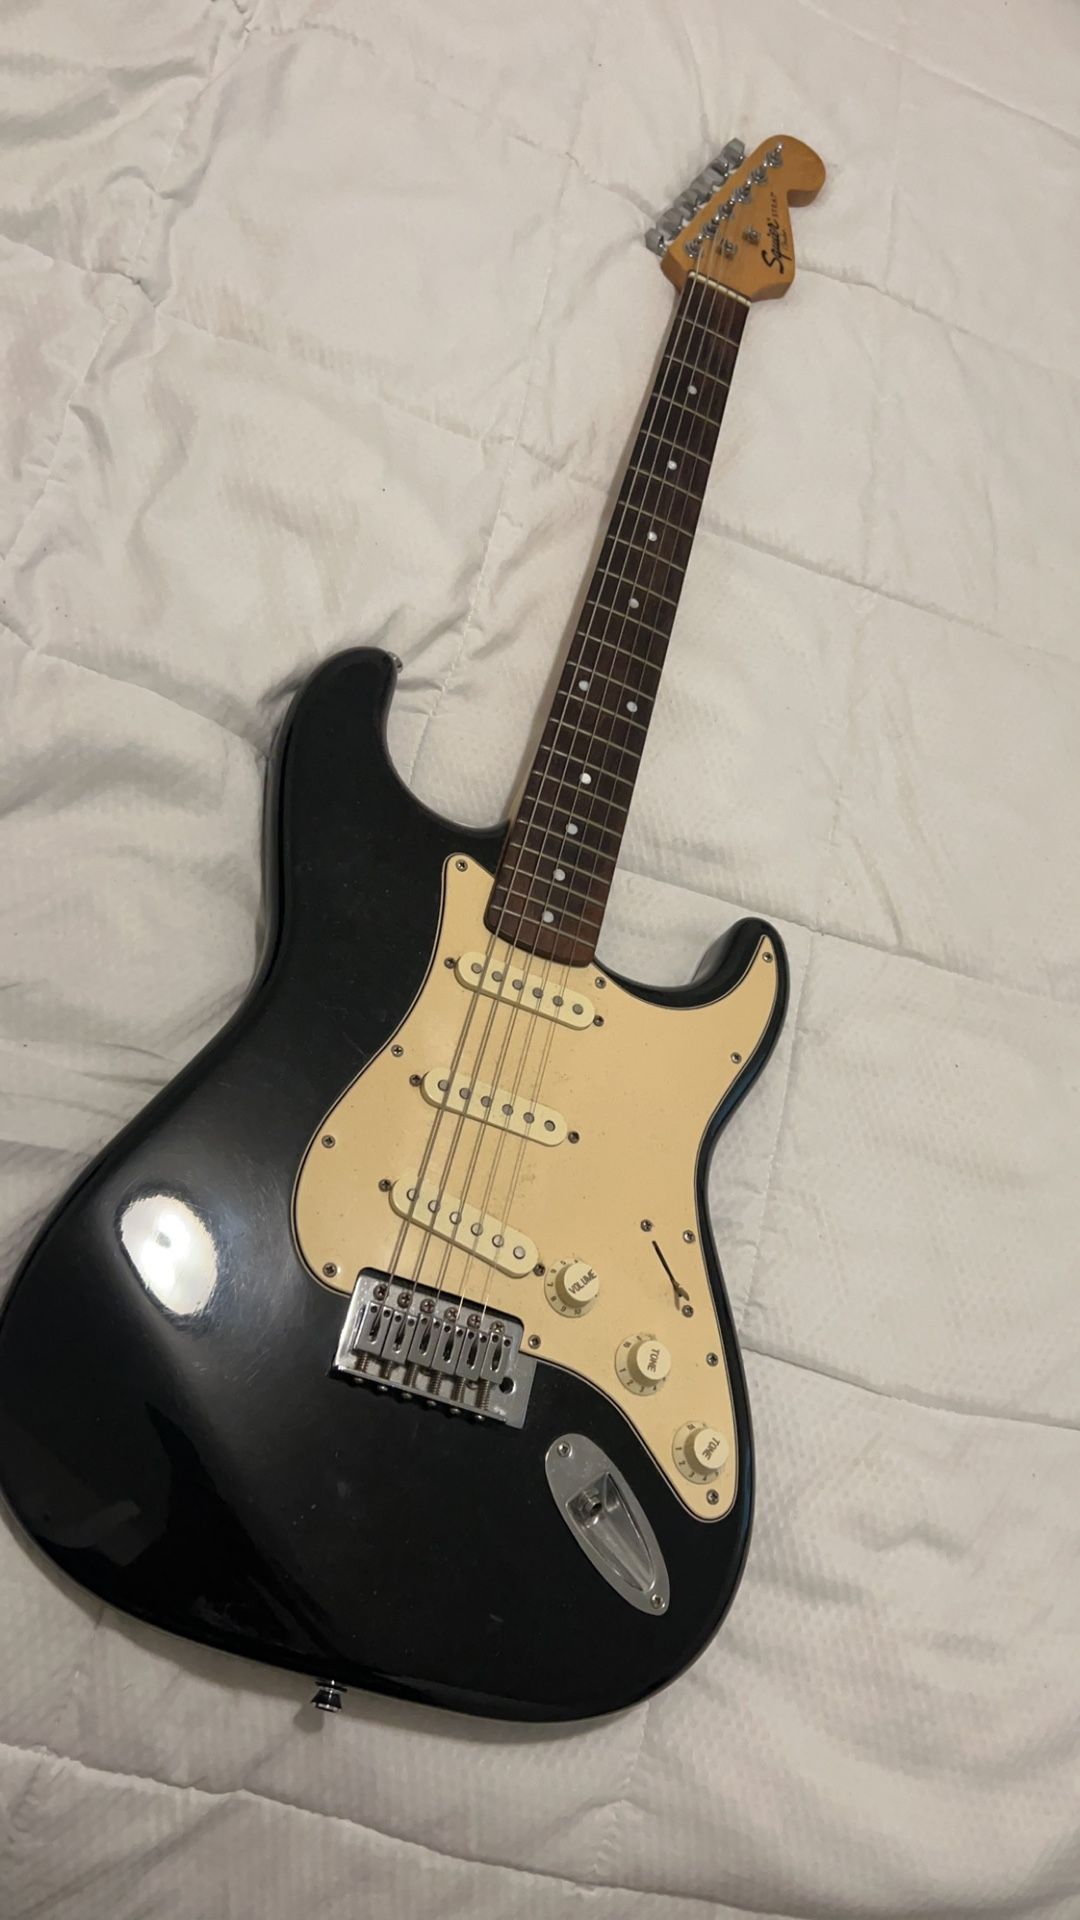 Squire Stratocaster Guitar by Fender